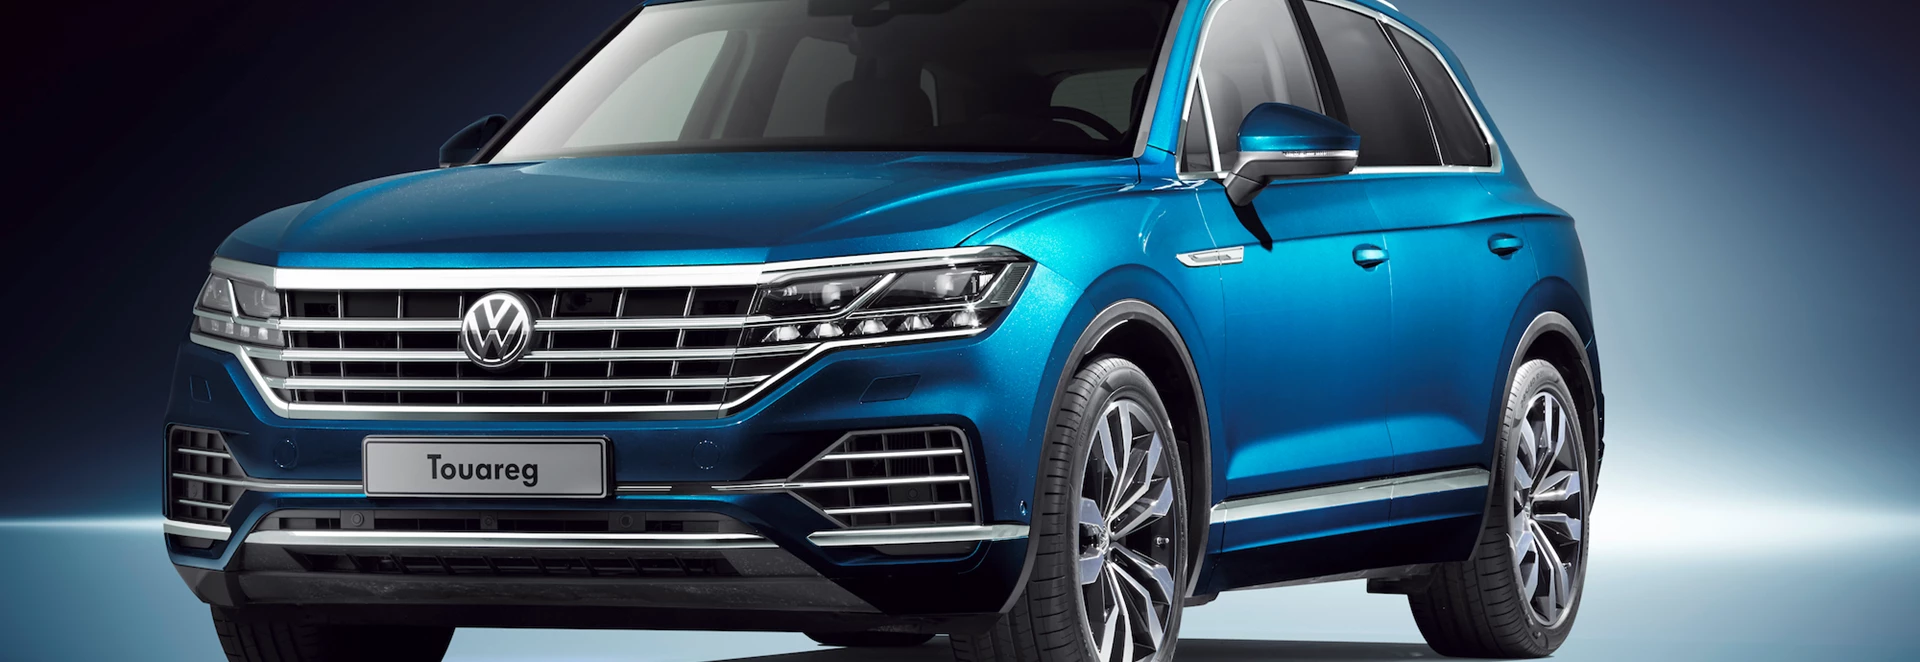 2018 Volkswagen Touareg is most advanced yet